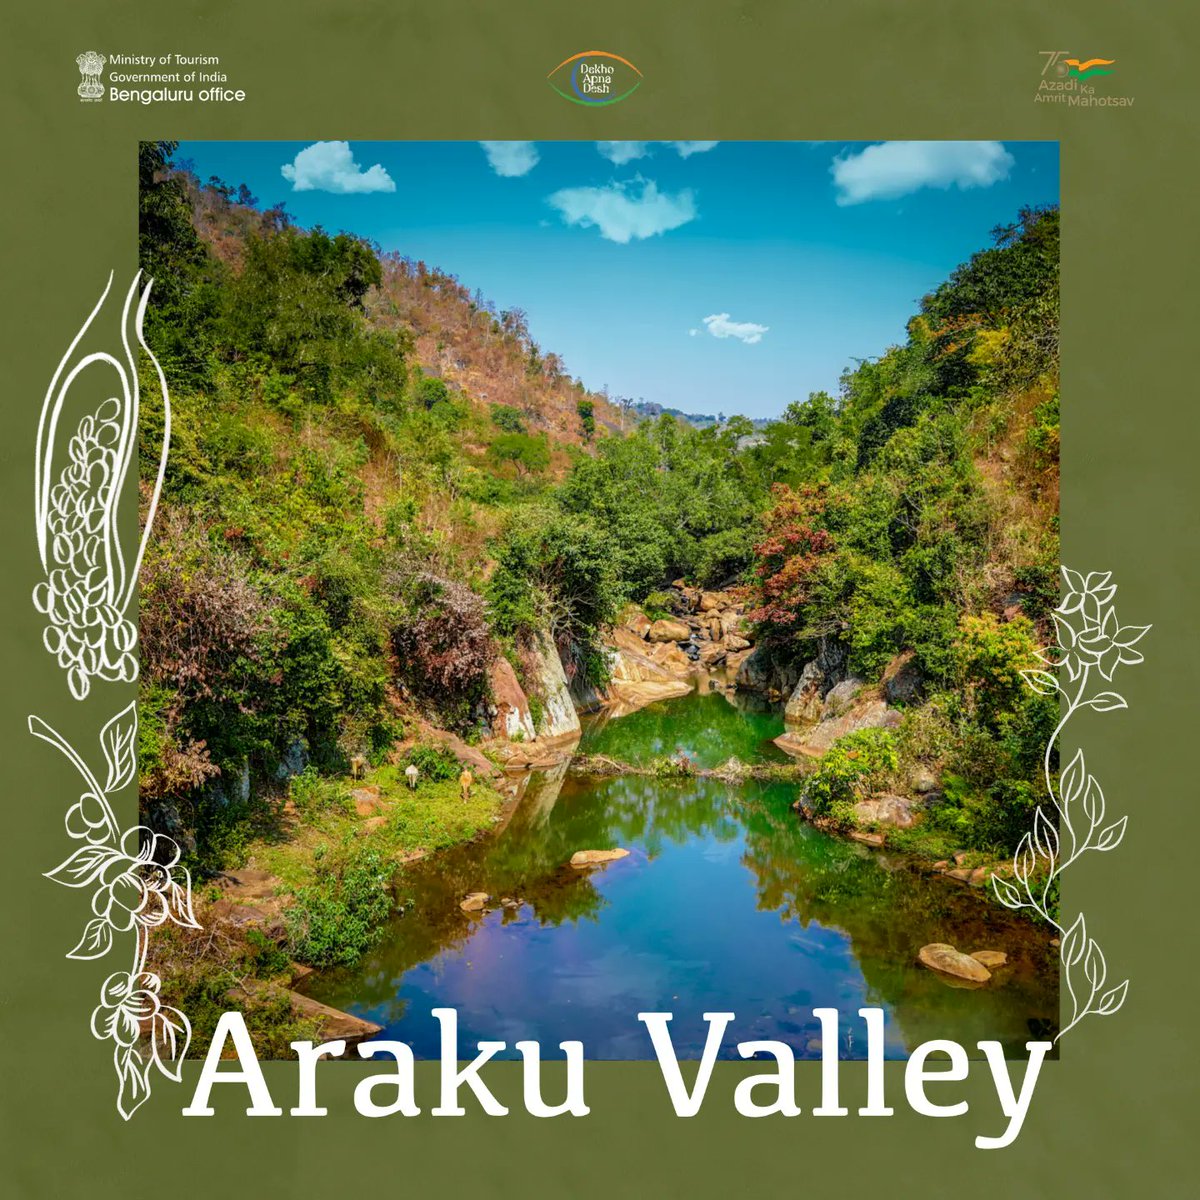 July is the prime monsoon month veiled in waterfalls, low clouds and greenery and we have a list of wonderful, easily accessible destinations for you to visit next month.

1. Araku Valley: A hidden coffee paradise near Vishakapatnam

#IndianMonsoon #ArakuValley #Lonavala #Puri